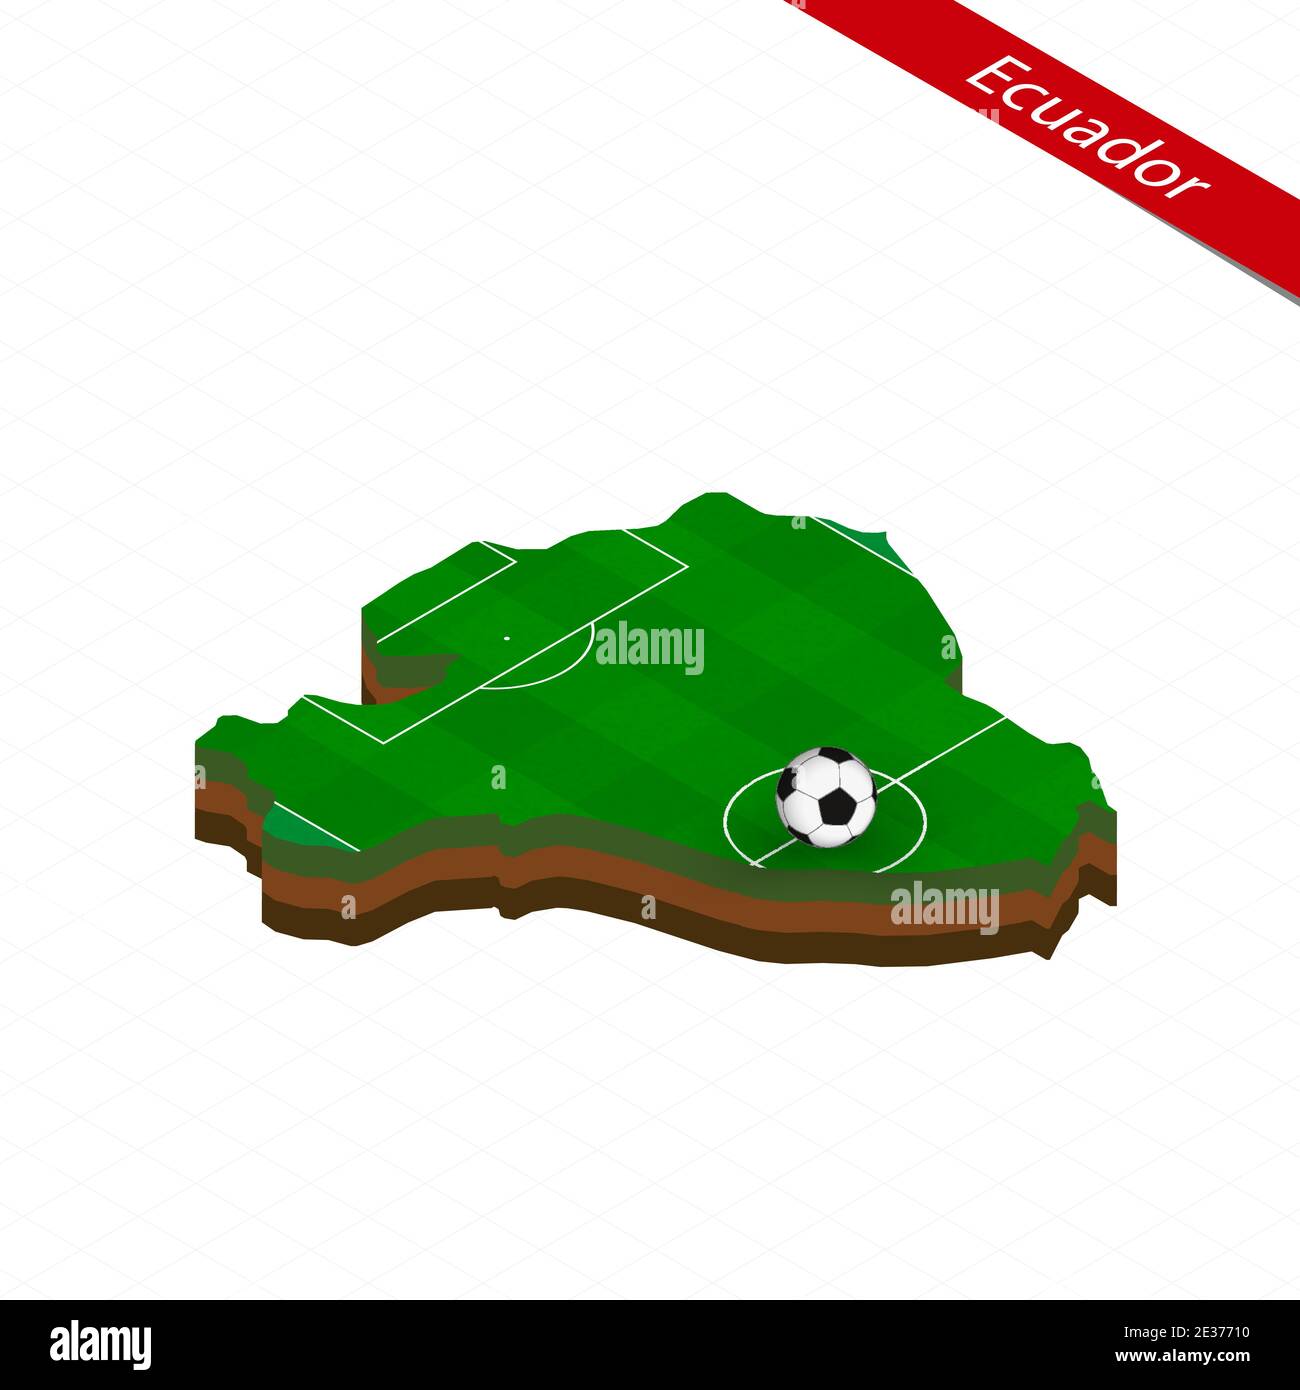 Isometric map of Ecuador with soccer field. Football ball in center of ...